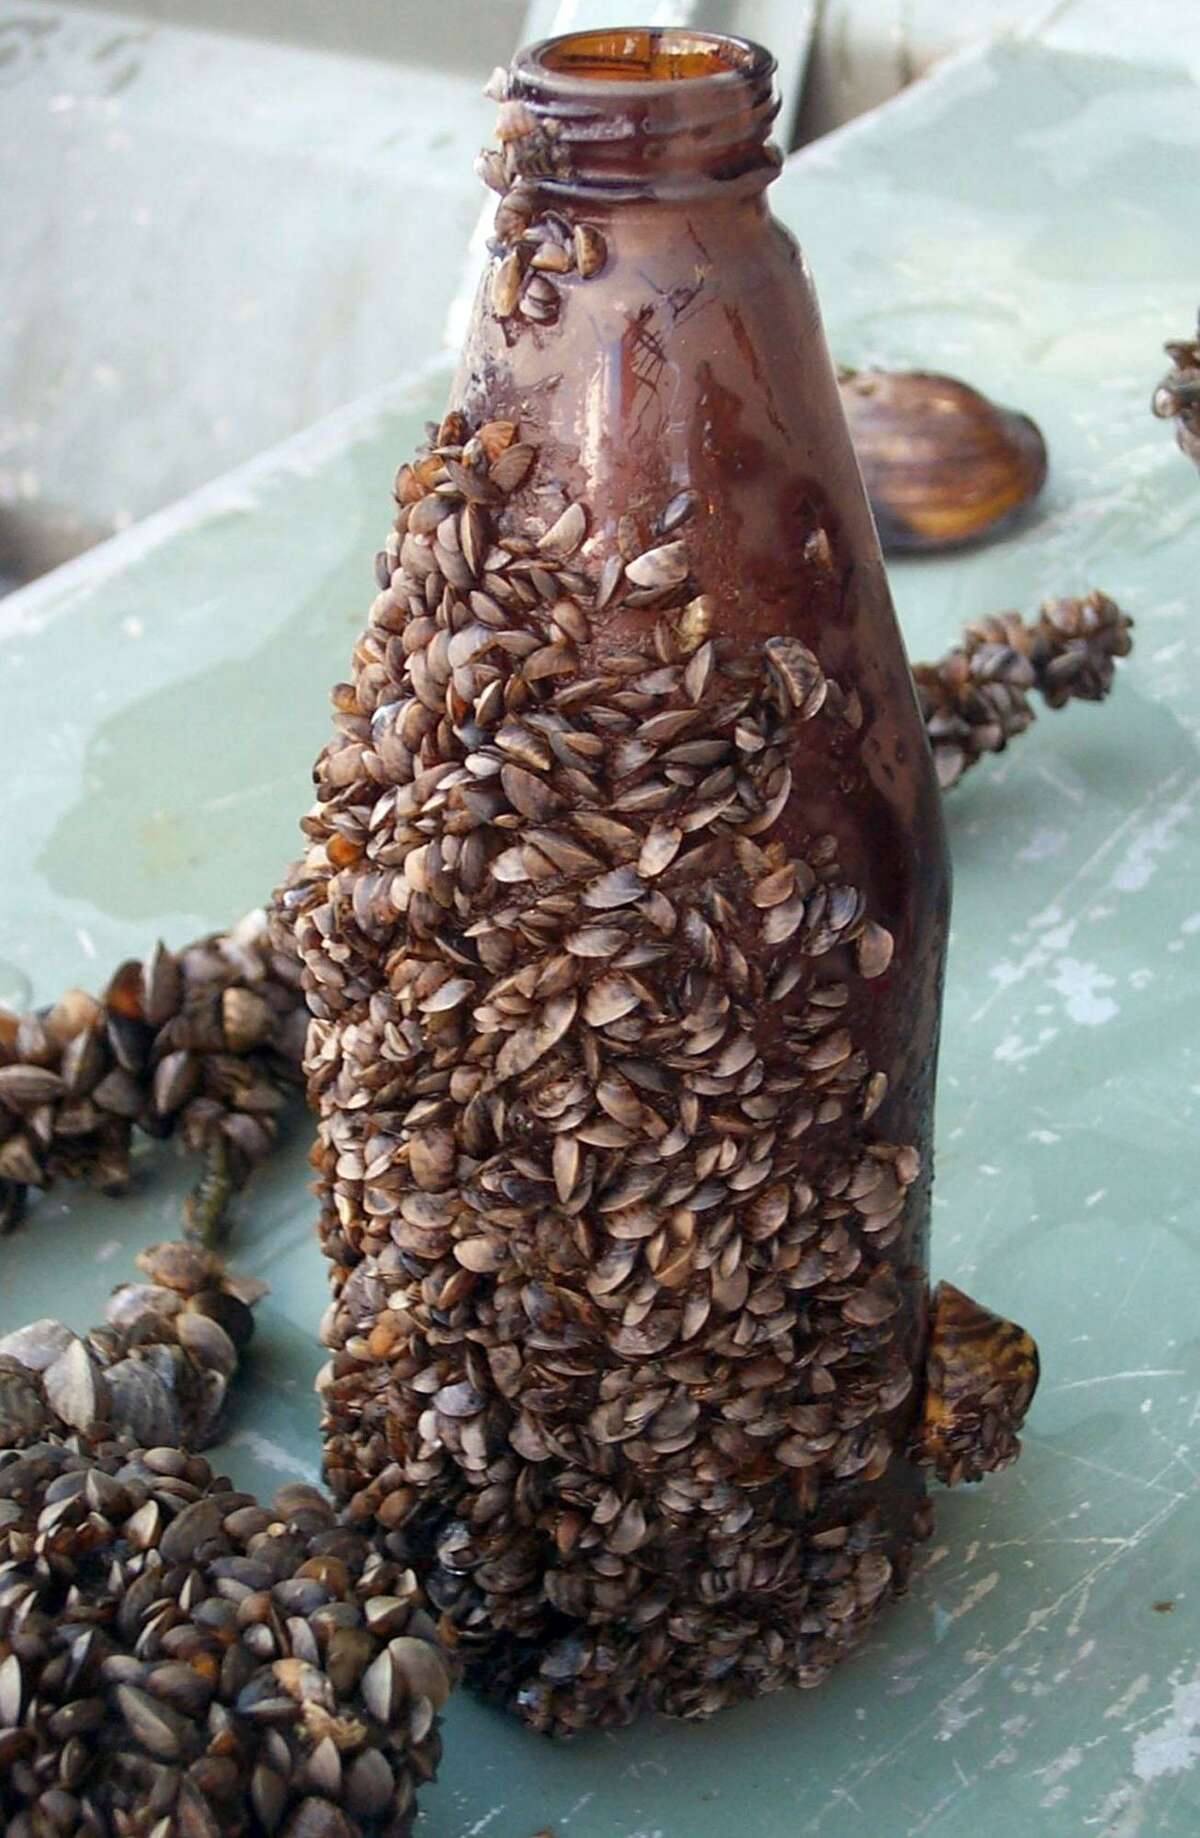 Don’t let invasive zebra mussels, a non-native species, infect Candlewood Lake.